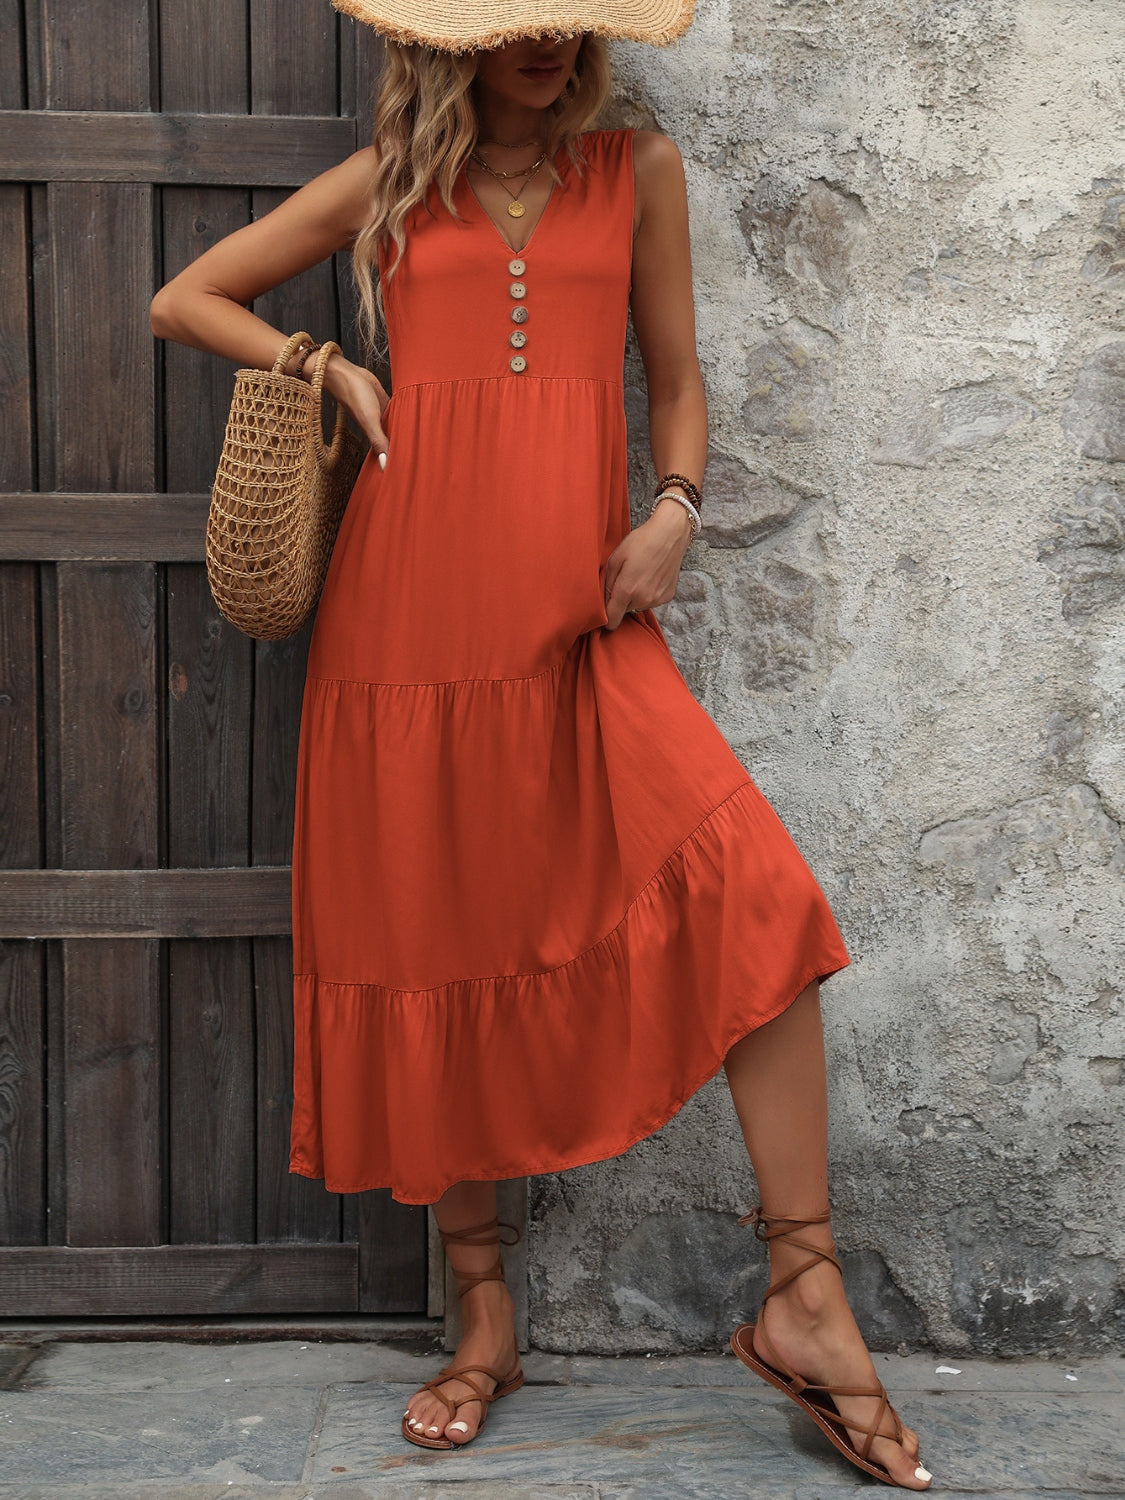 Cotton Sleeveless Dress with Decorative Buttons Red Orange